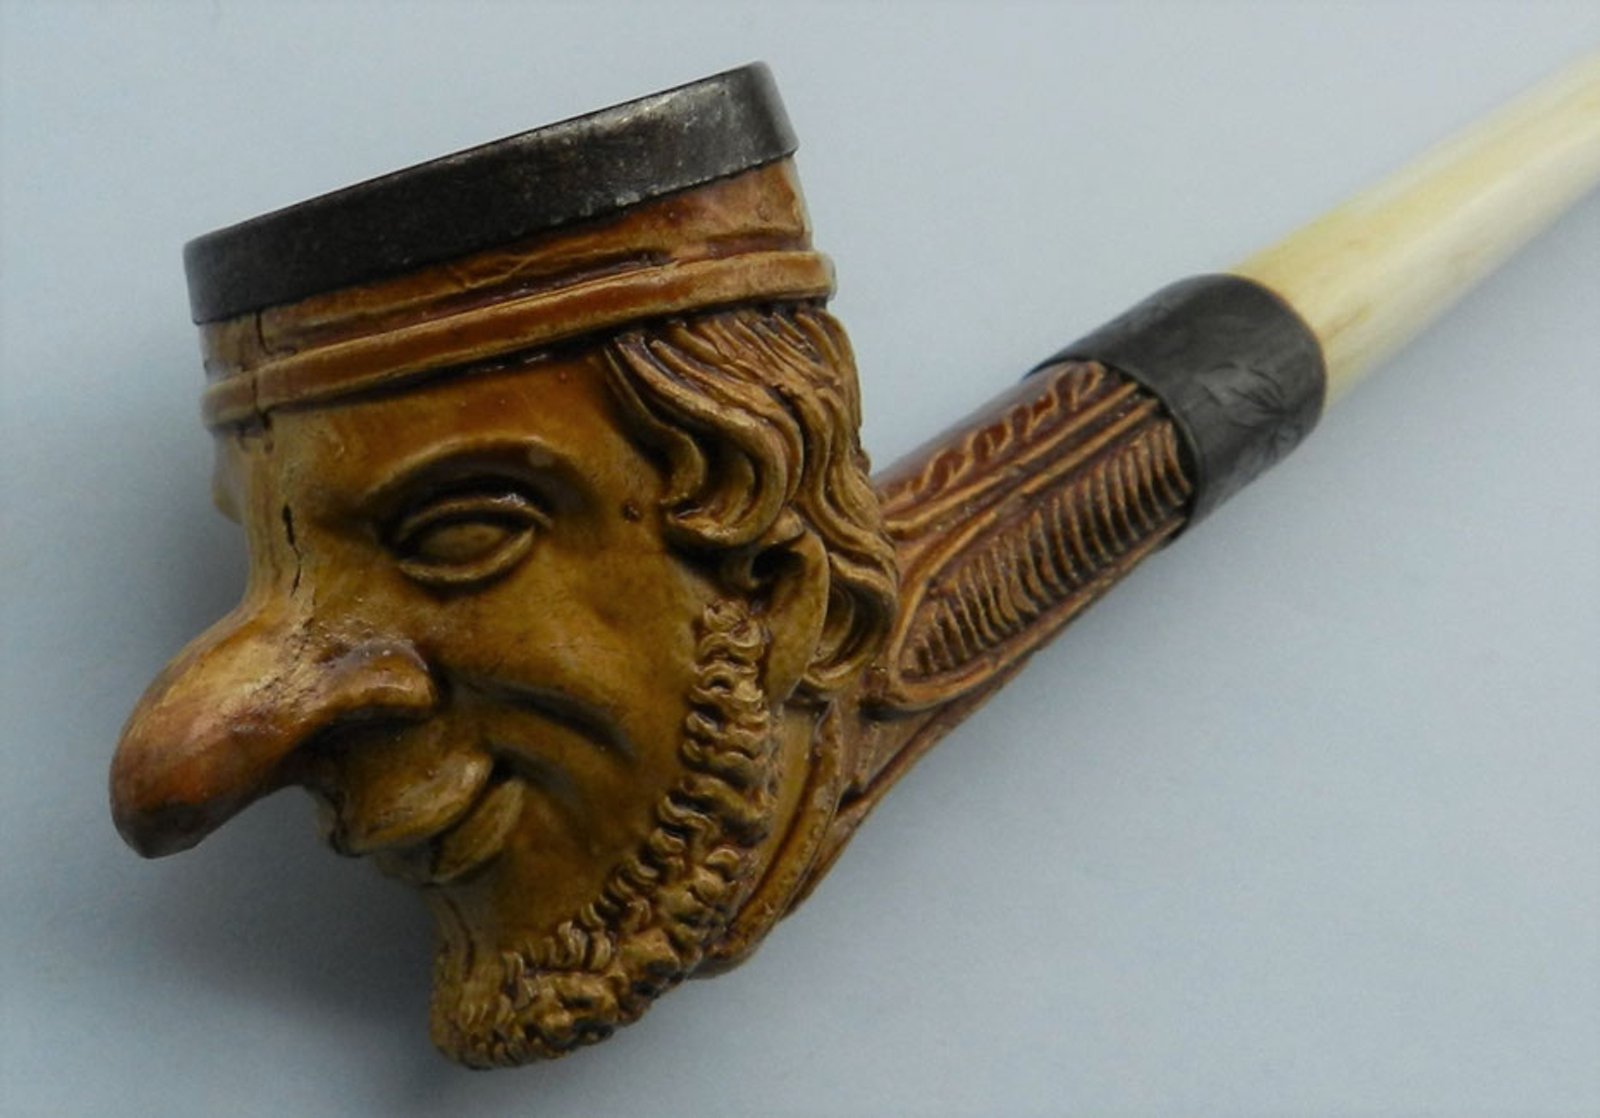 Pipe of the month